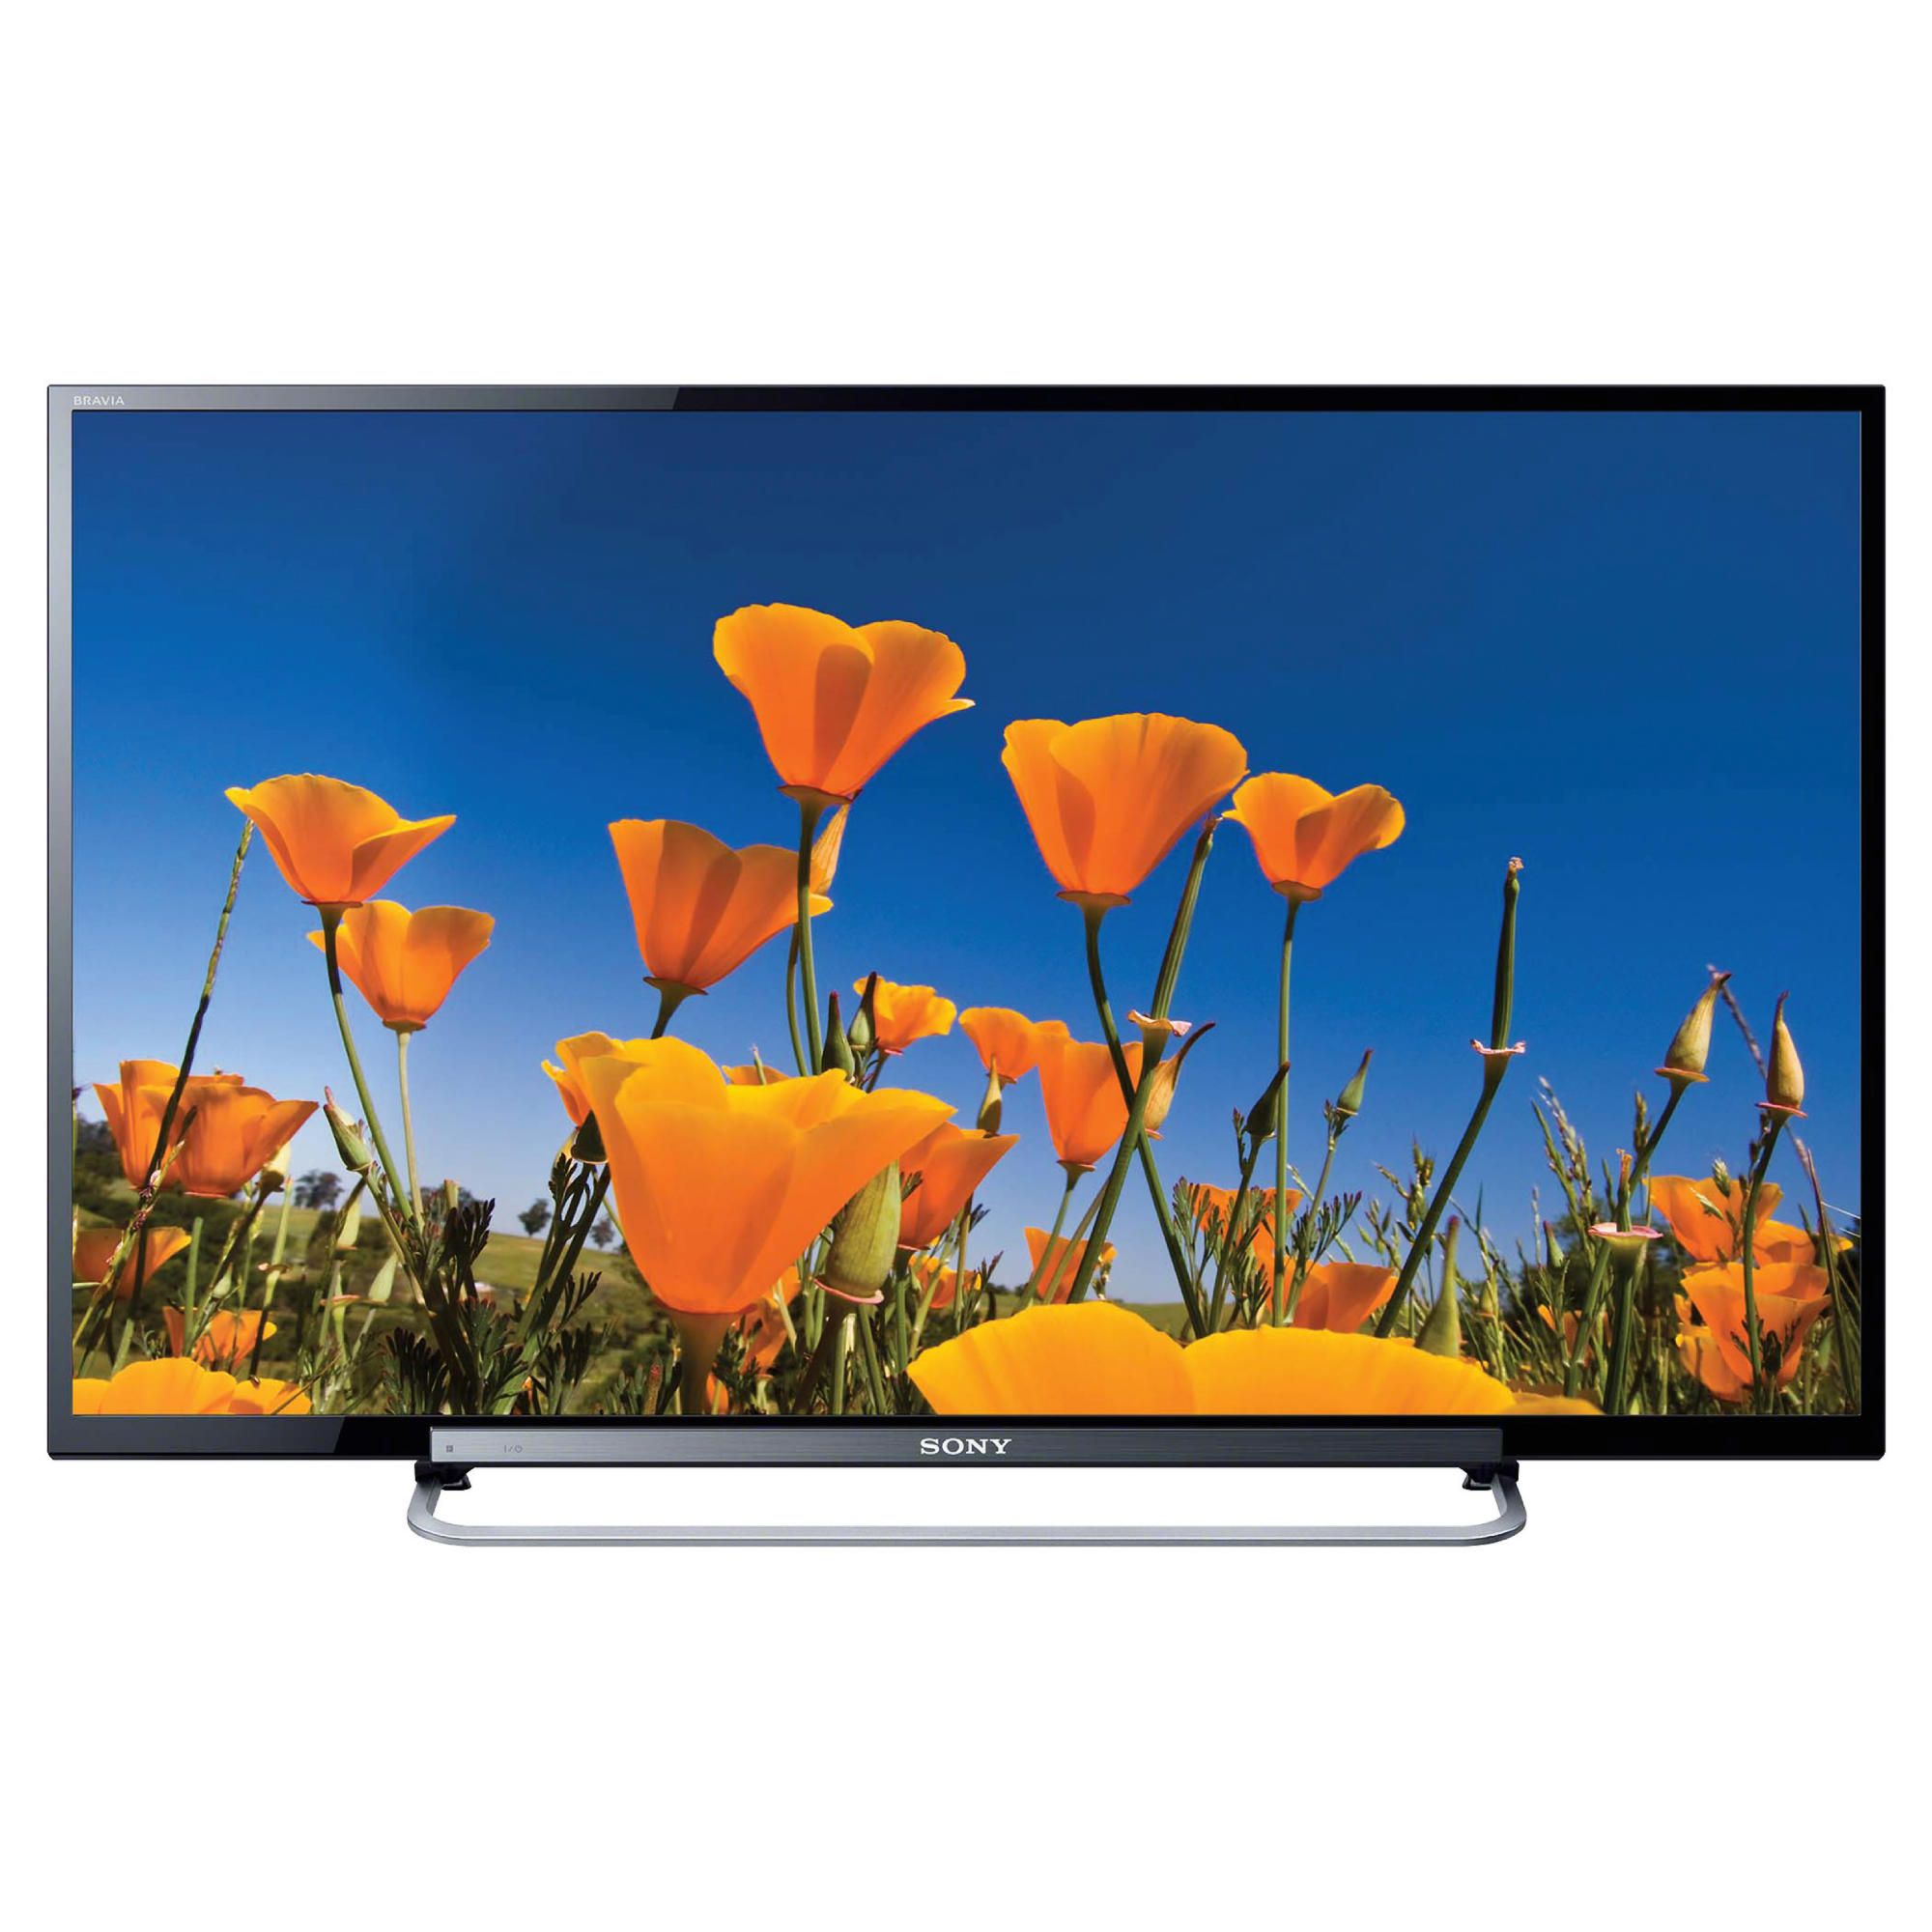 Sony KDL46R473 46 inch Full HD 1080p LED TV with Freeview HD